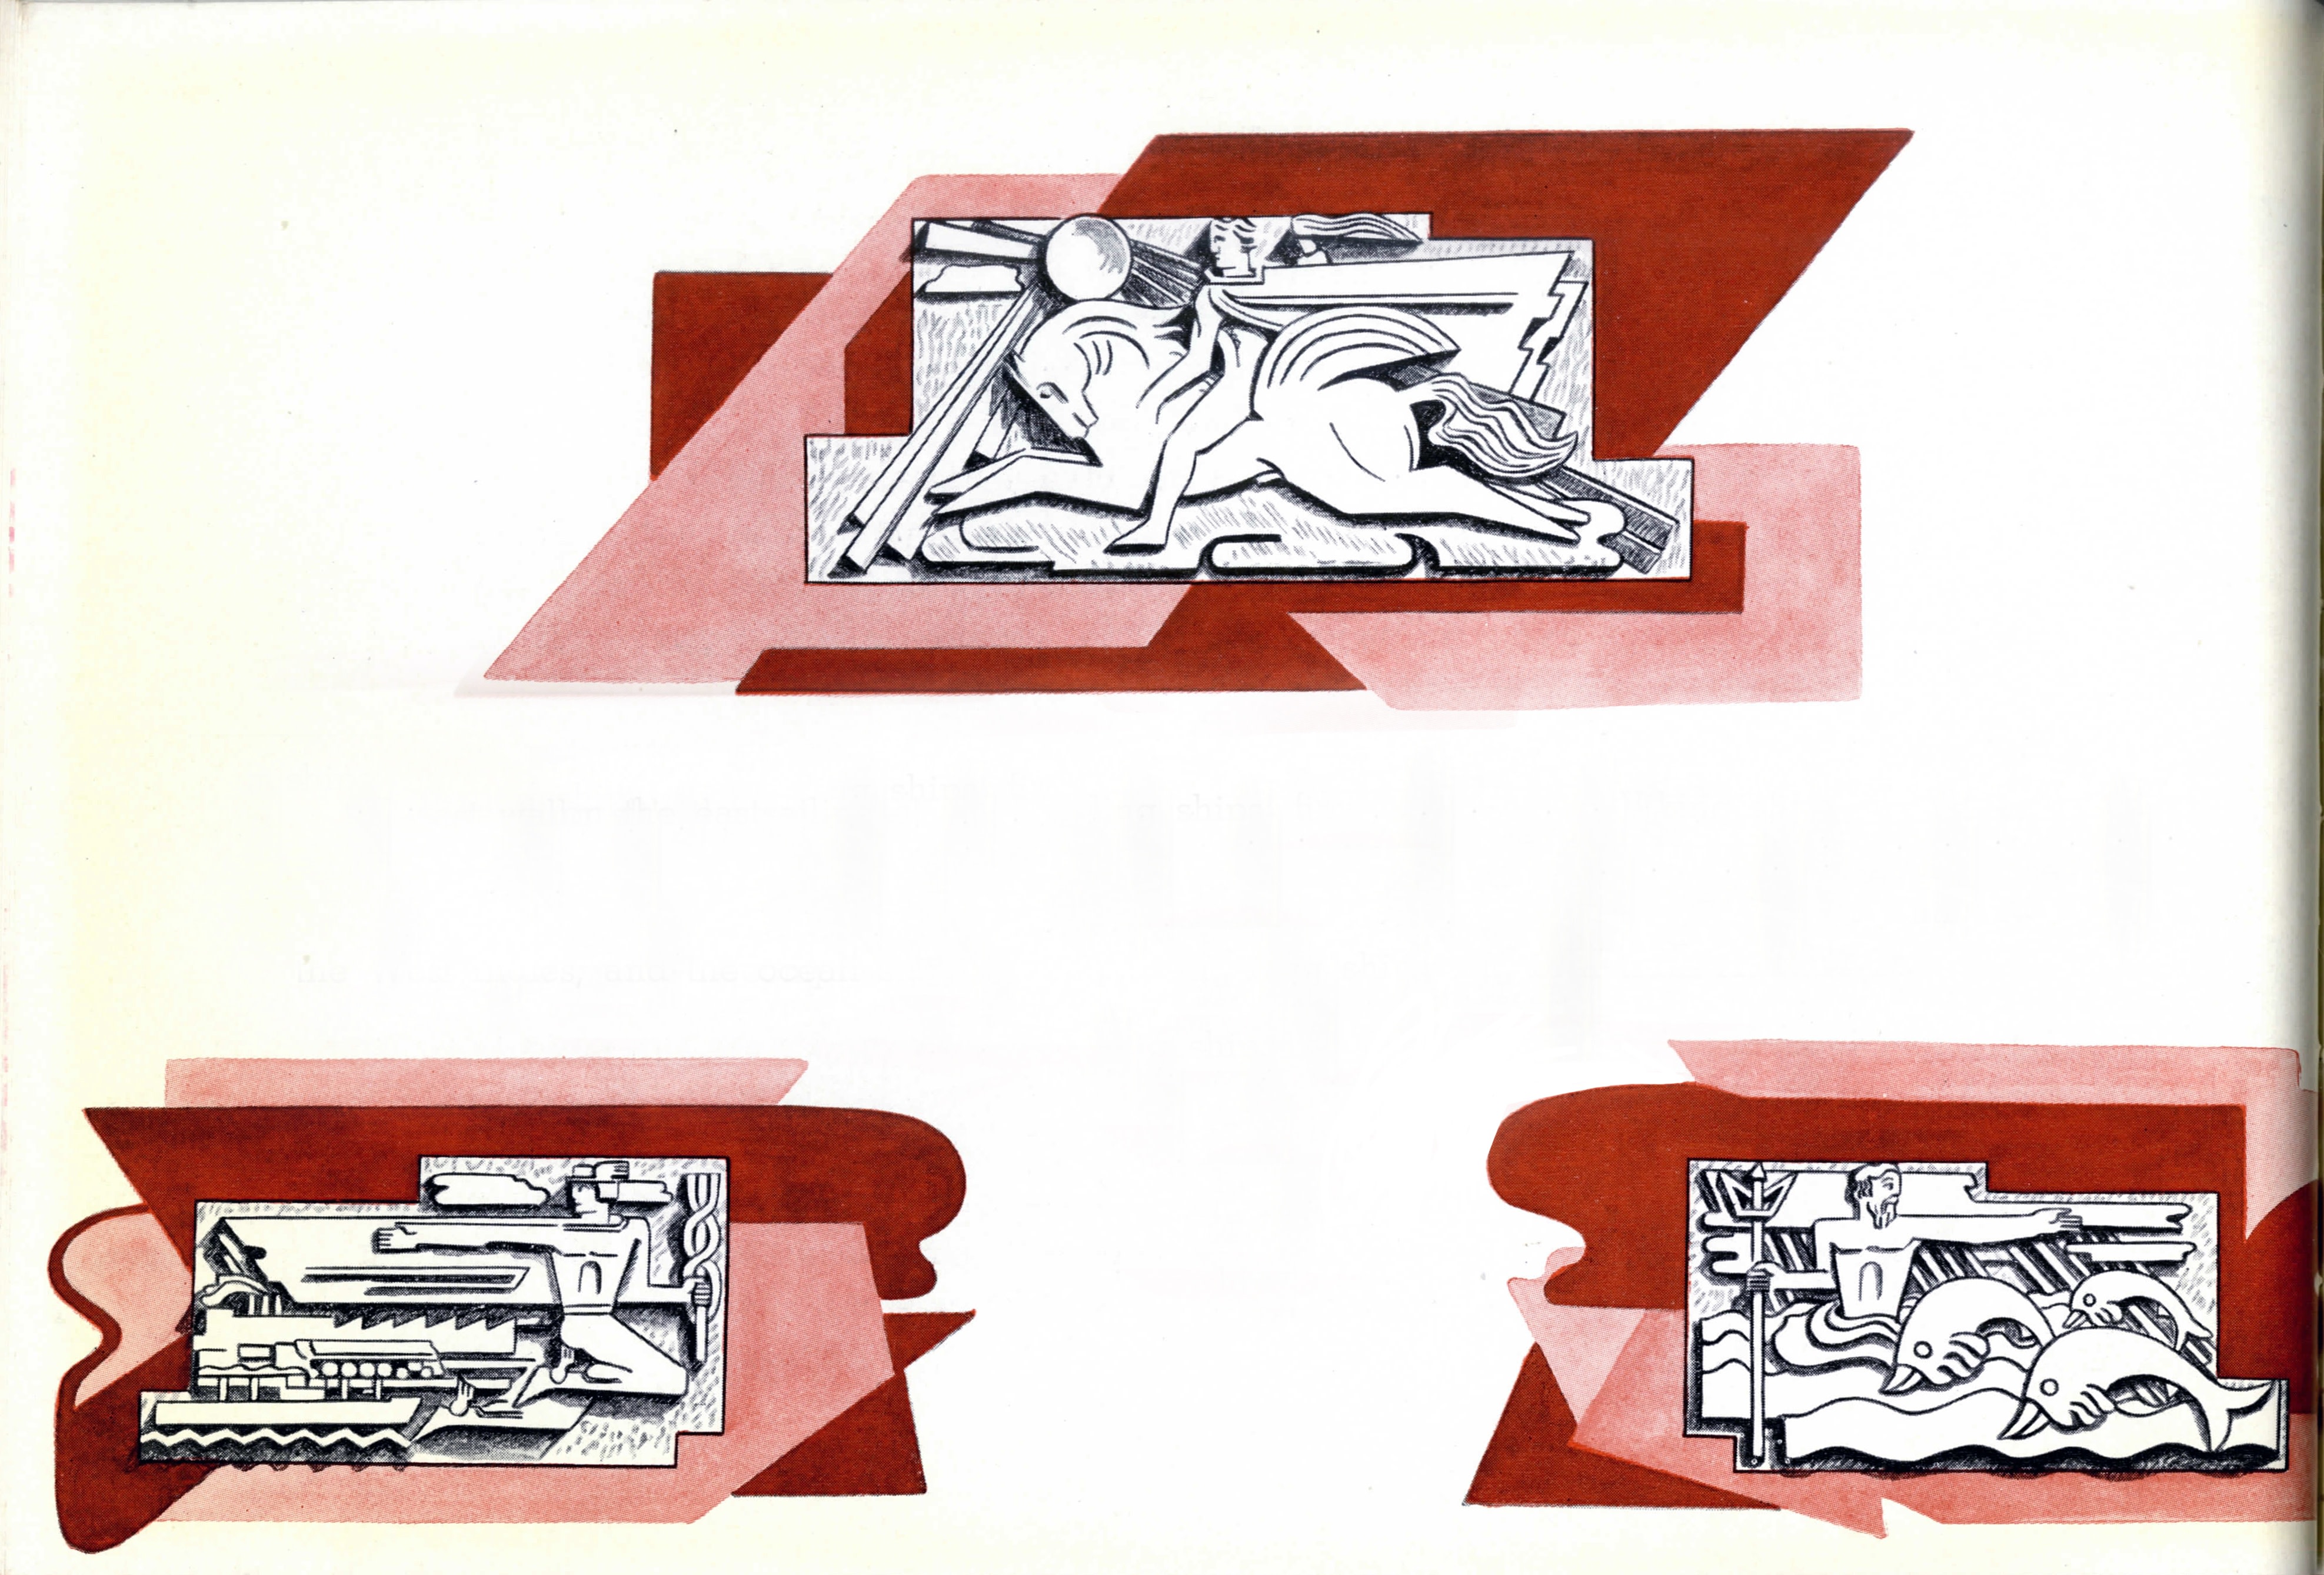 Bas-Relief Works by Brandtner at the CN Montreal Terminal